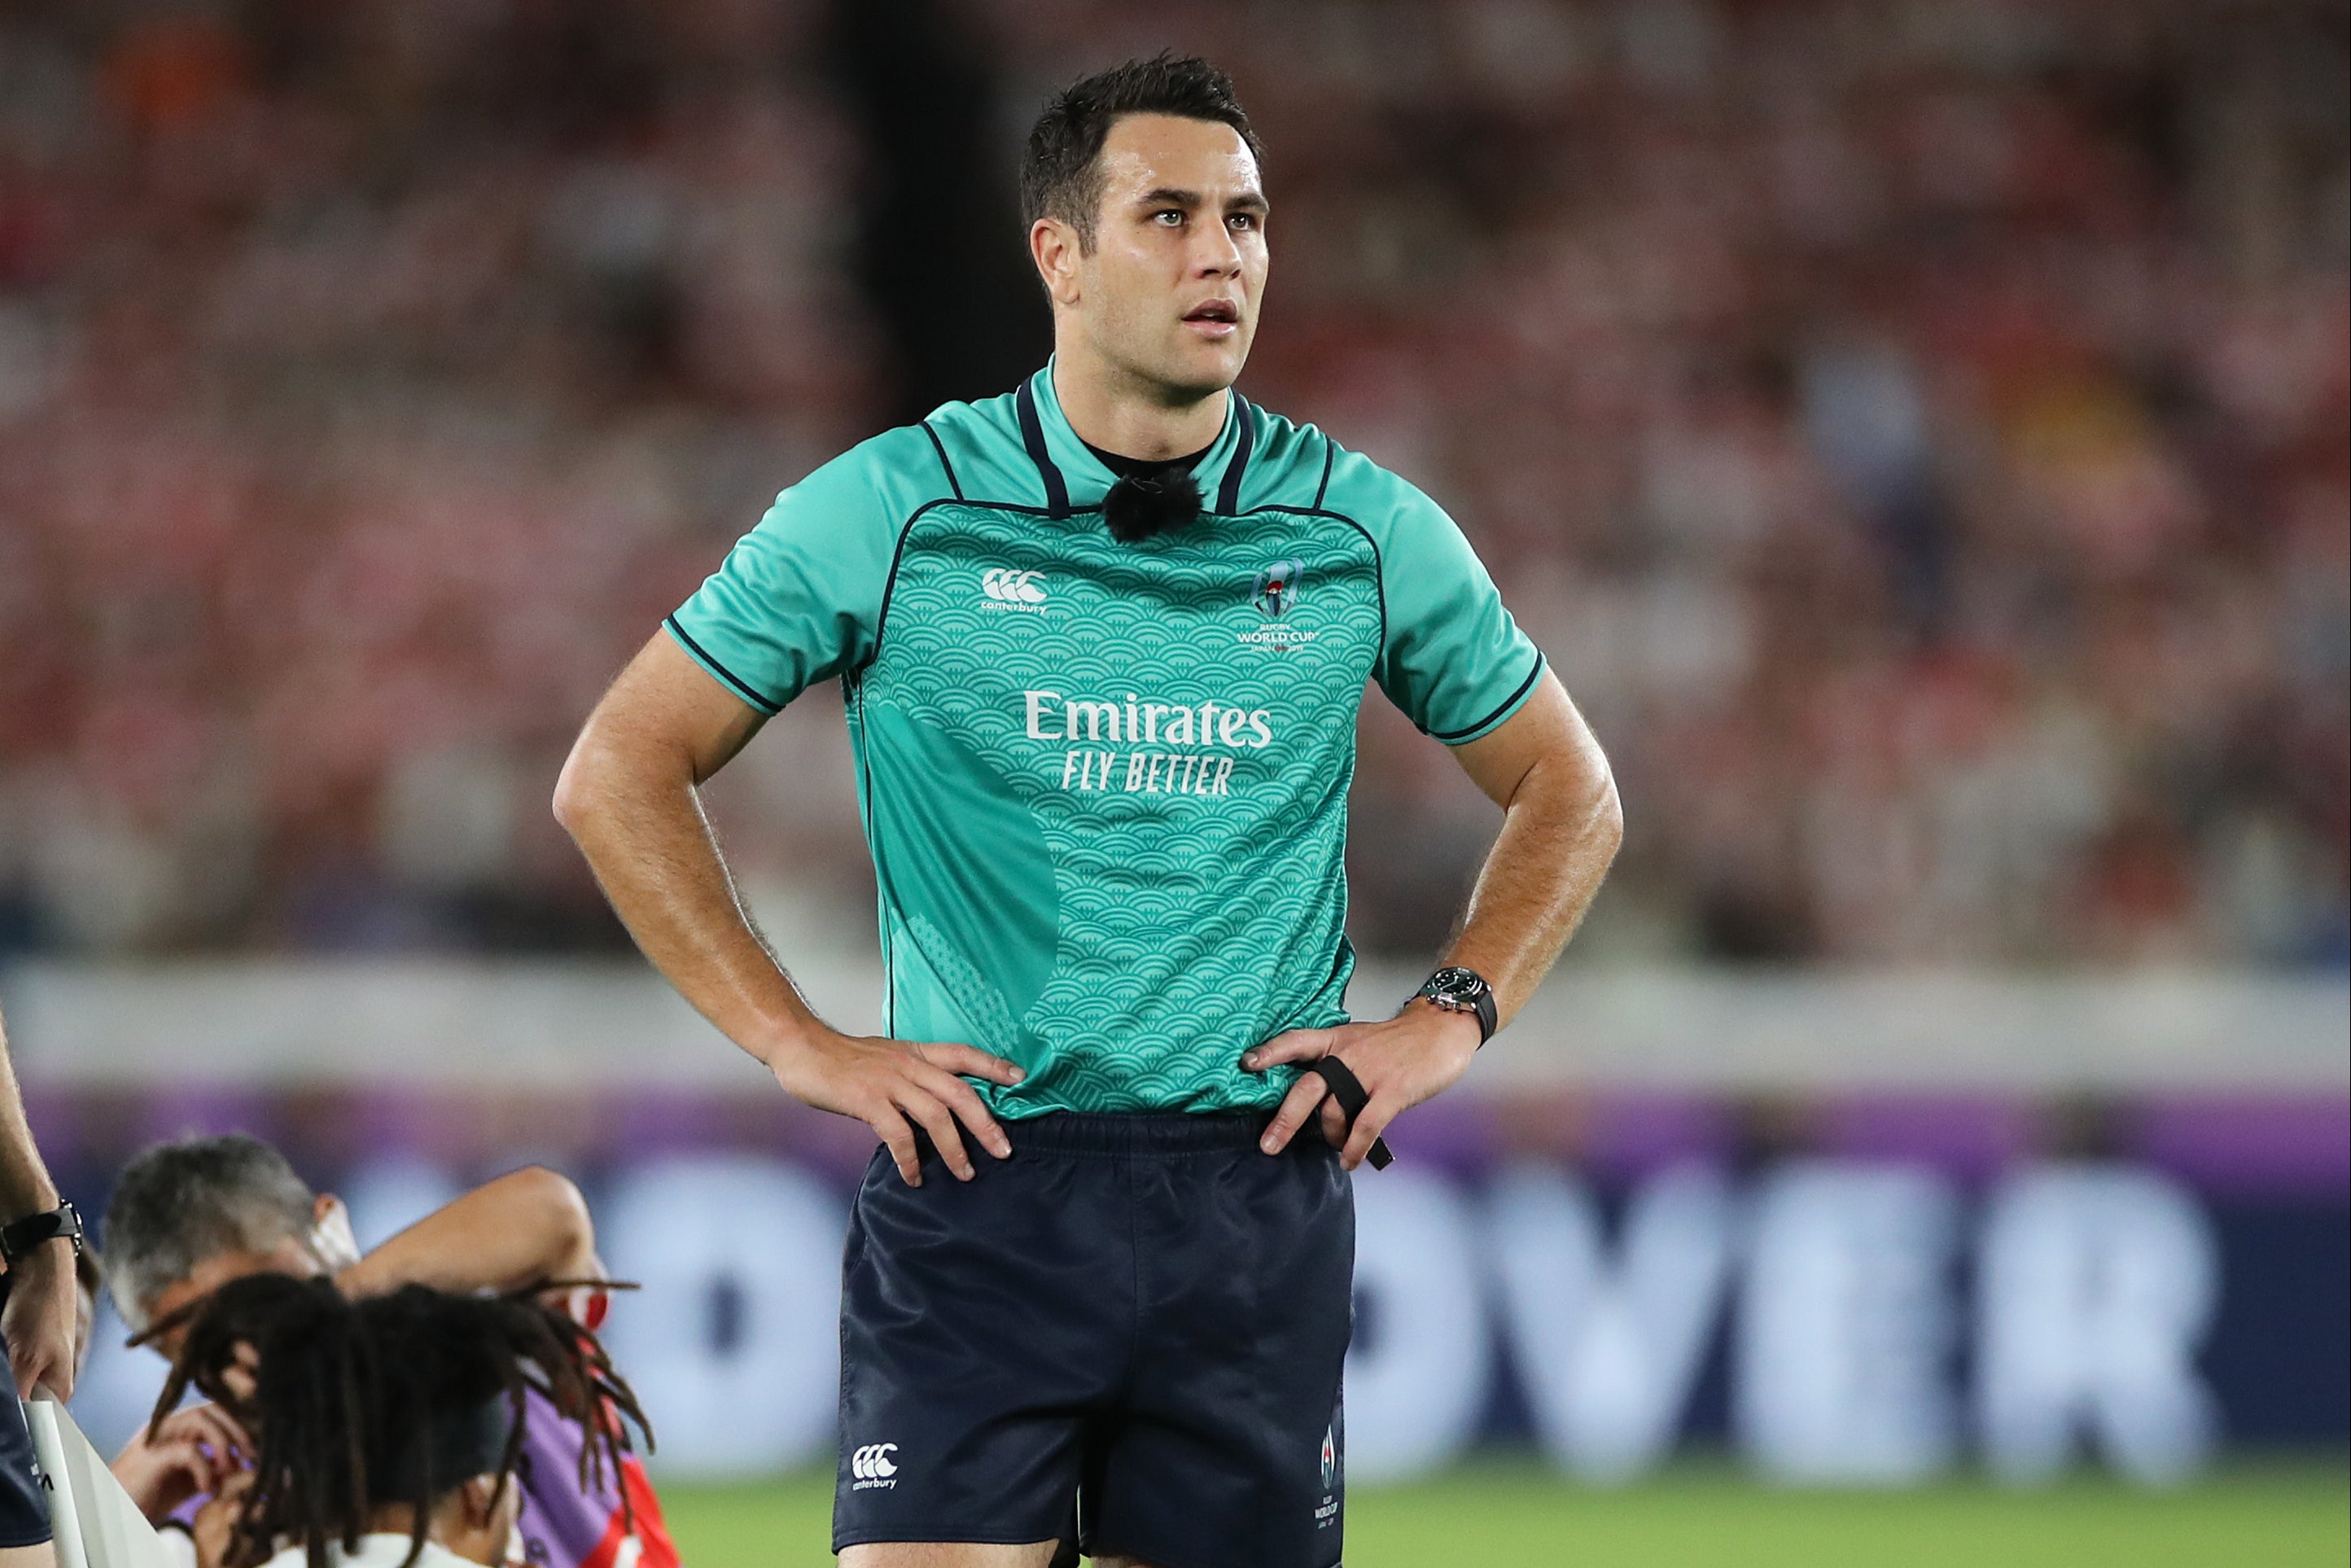 Ben O’Keeffe is one of the referees at the Rugby World Cup